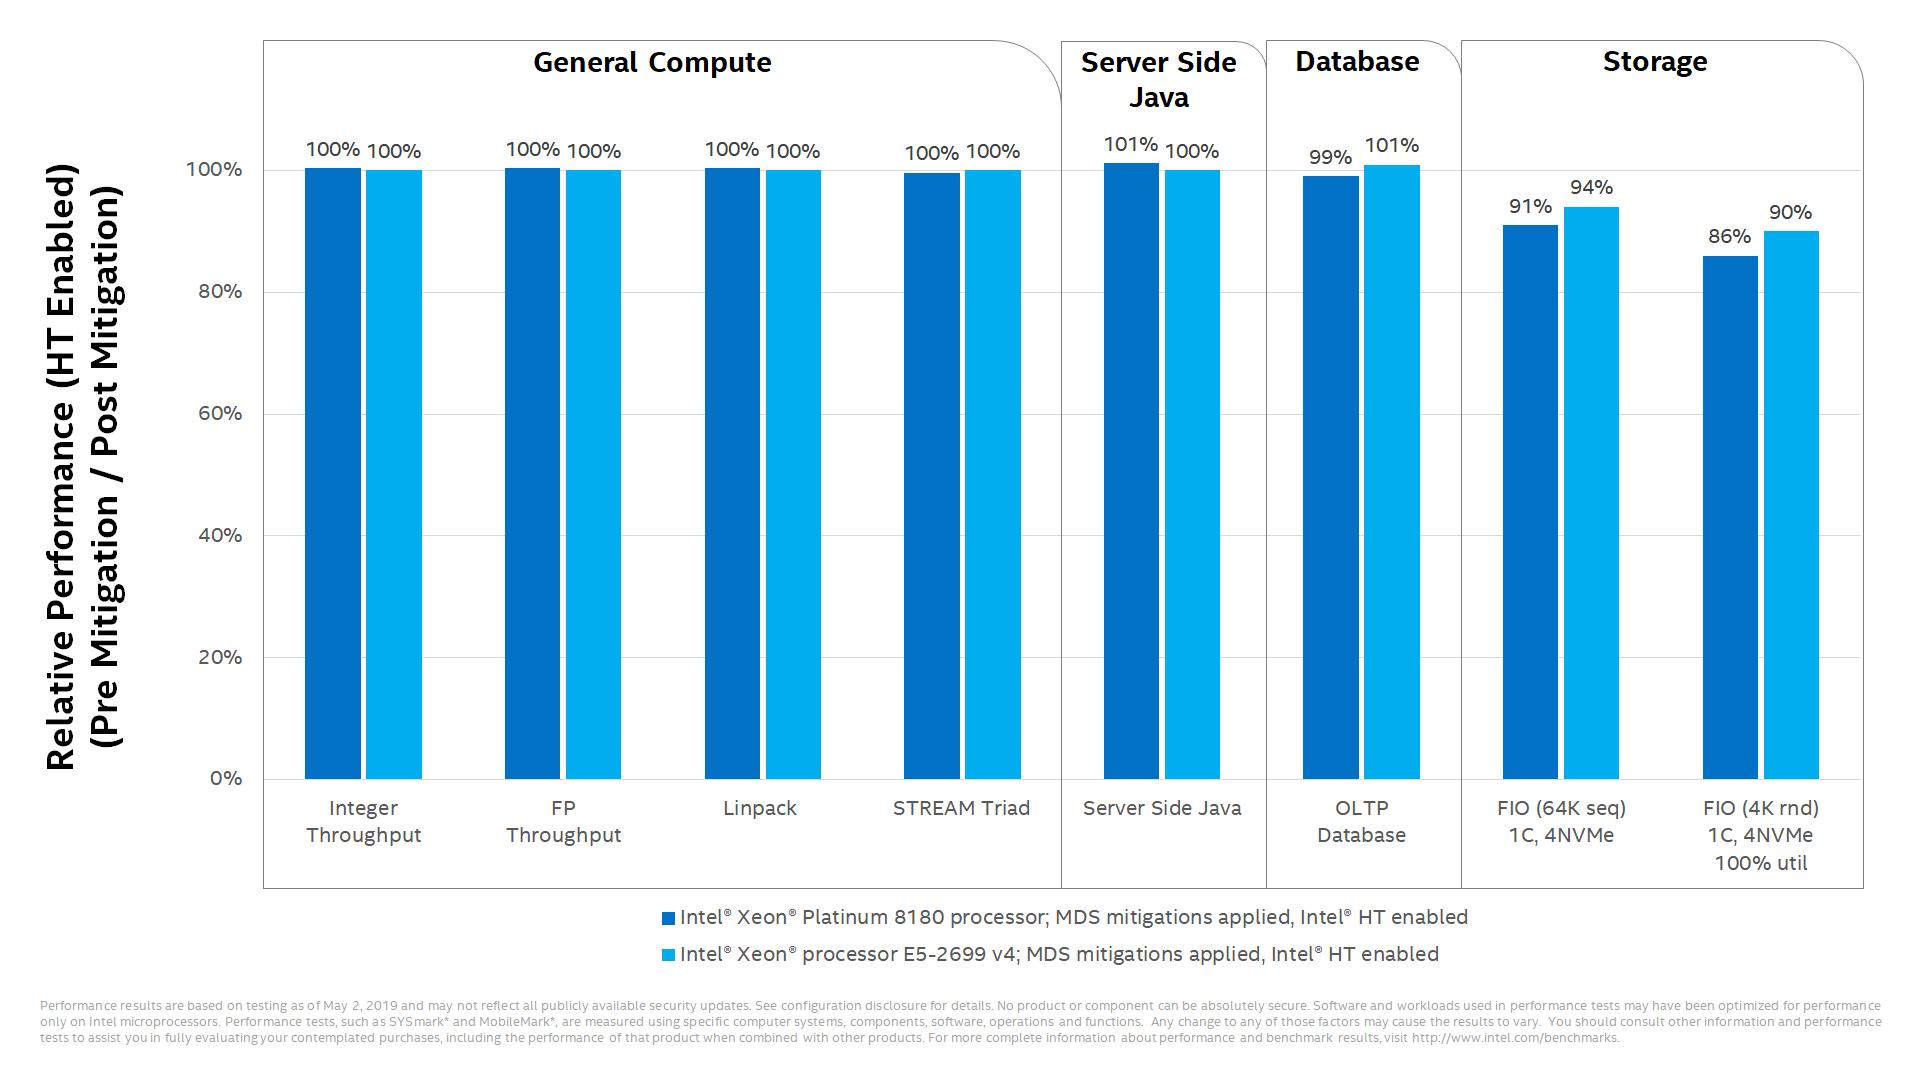 Some performance impact to select data center workloads